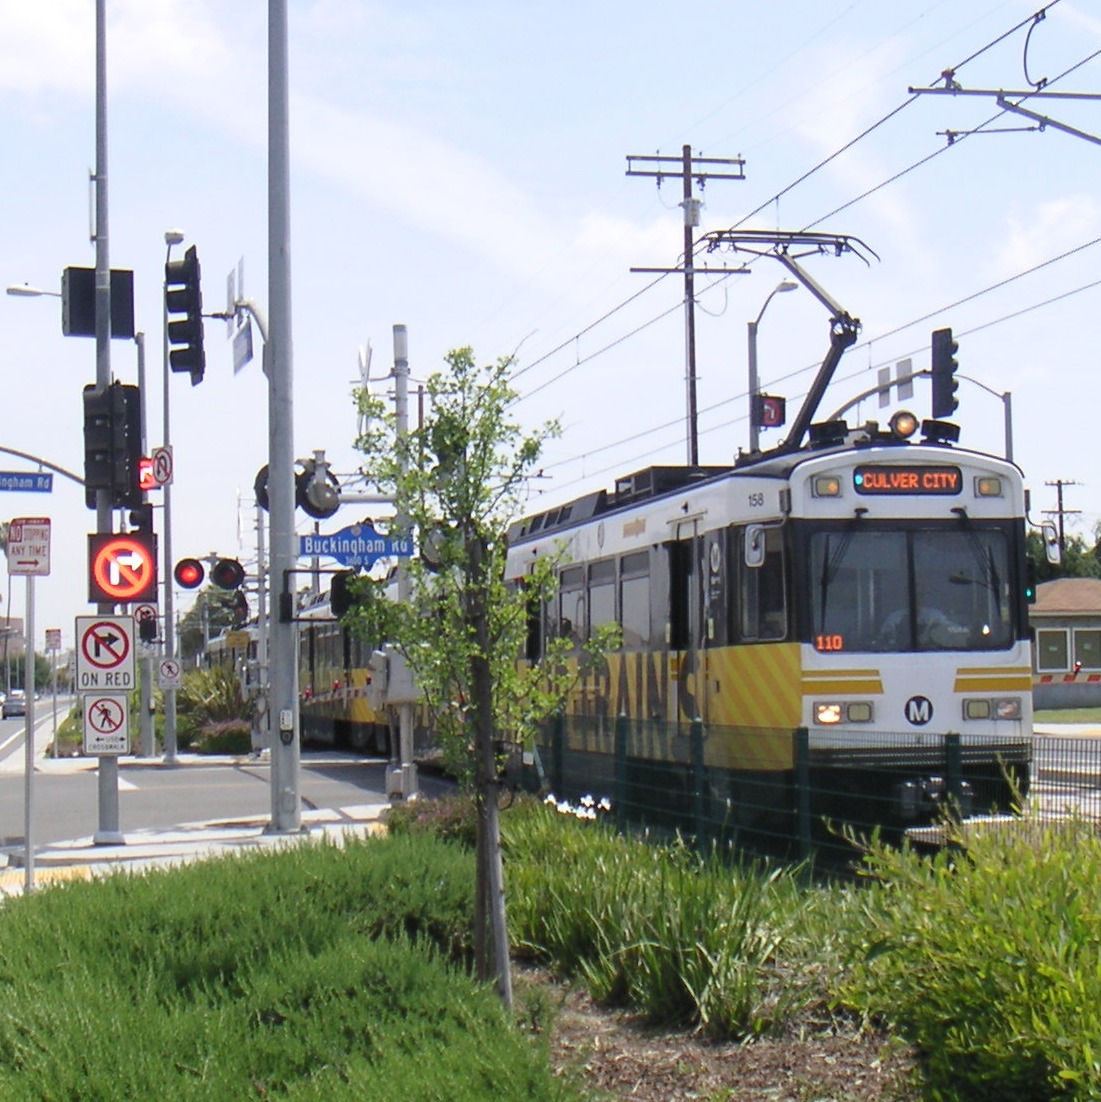 Blank Out signs at Buckingham and Expo Line,
                    West LA